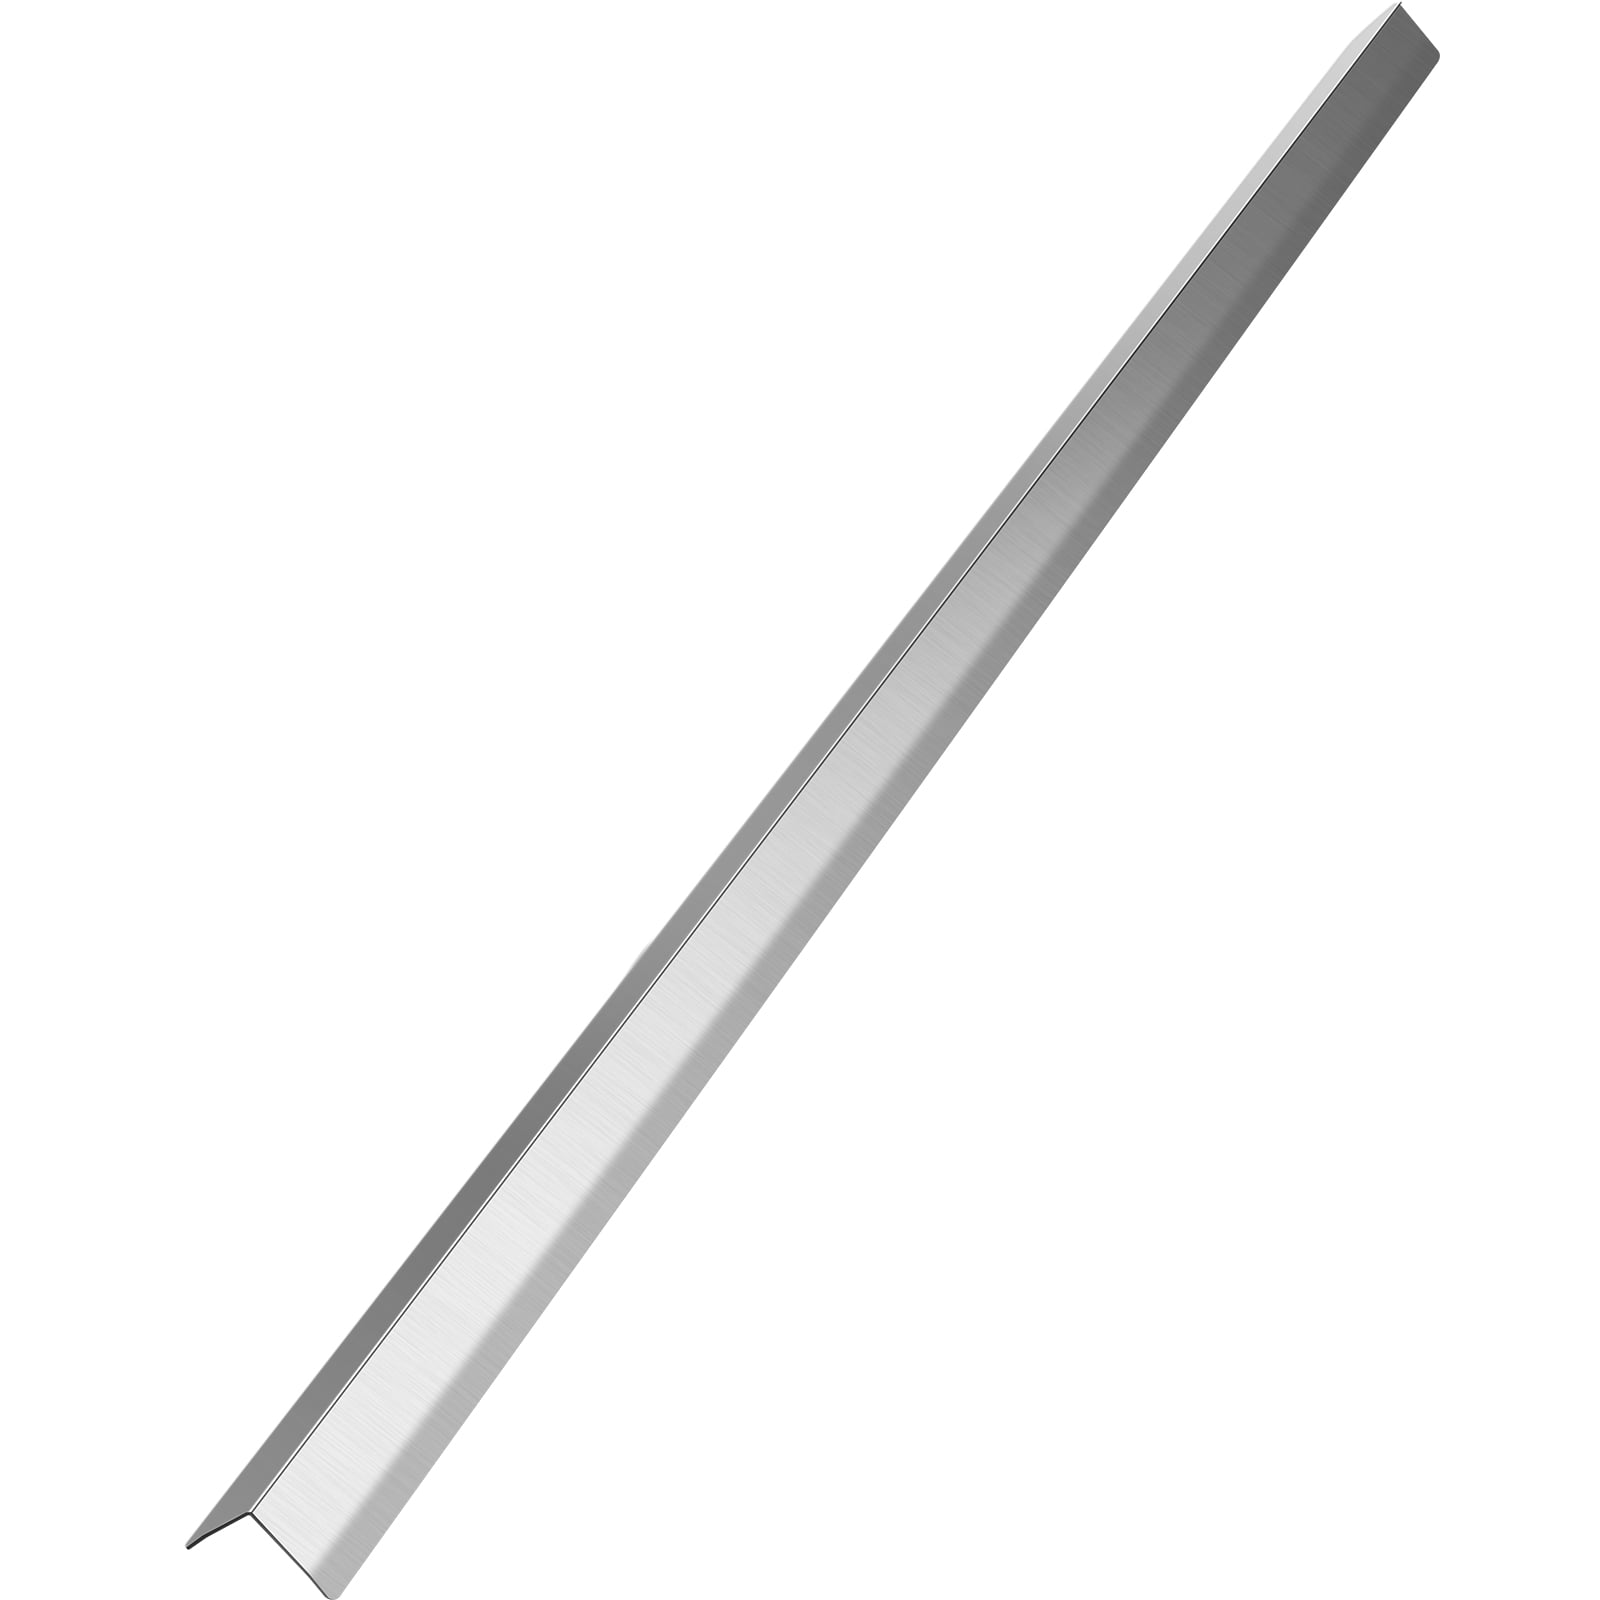 18 Gauge 60" X 1" X 1" Stainless Steel Angle Corner Guard Wall Trim for Kitchen